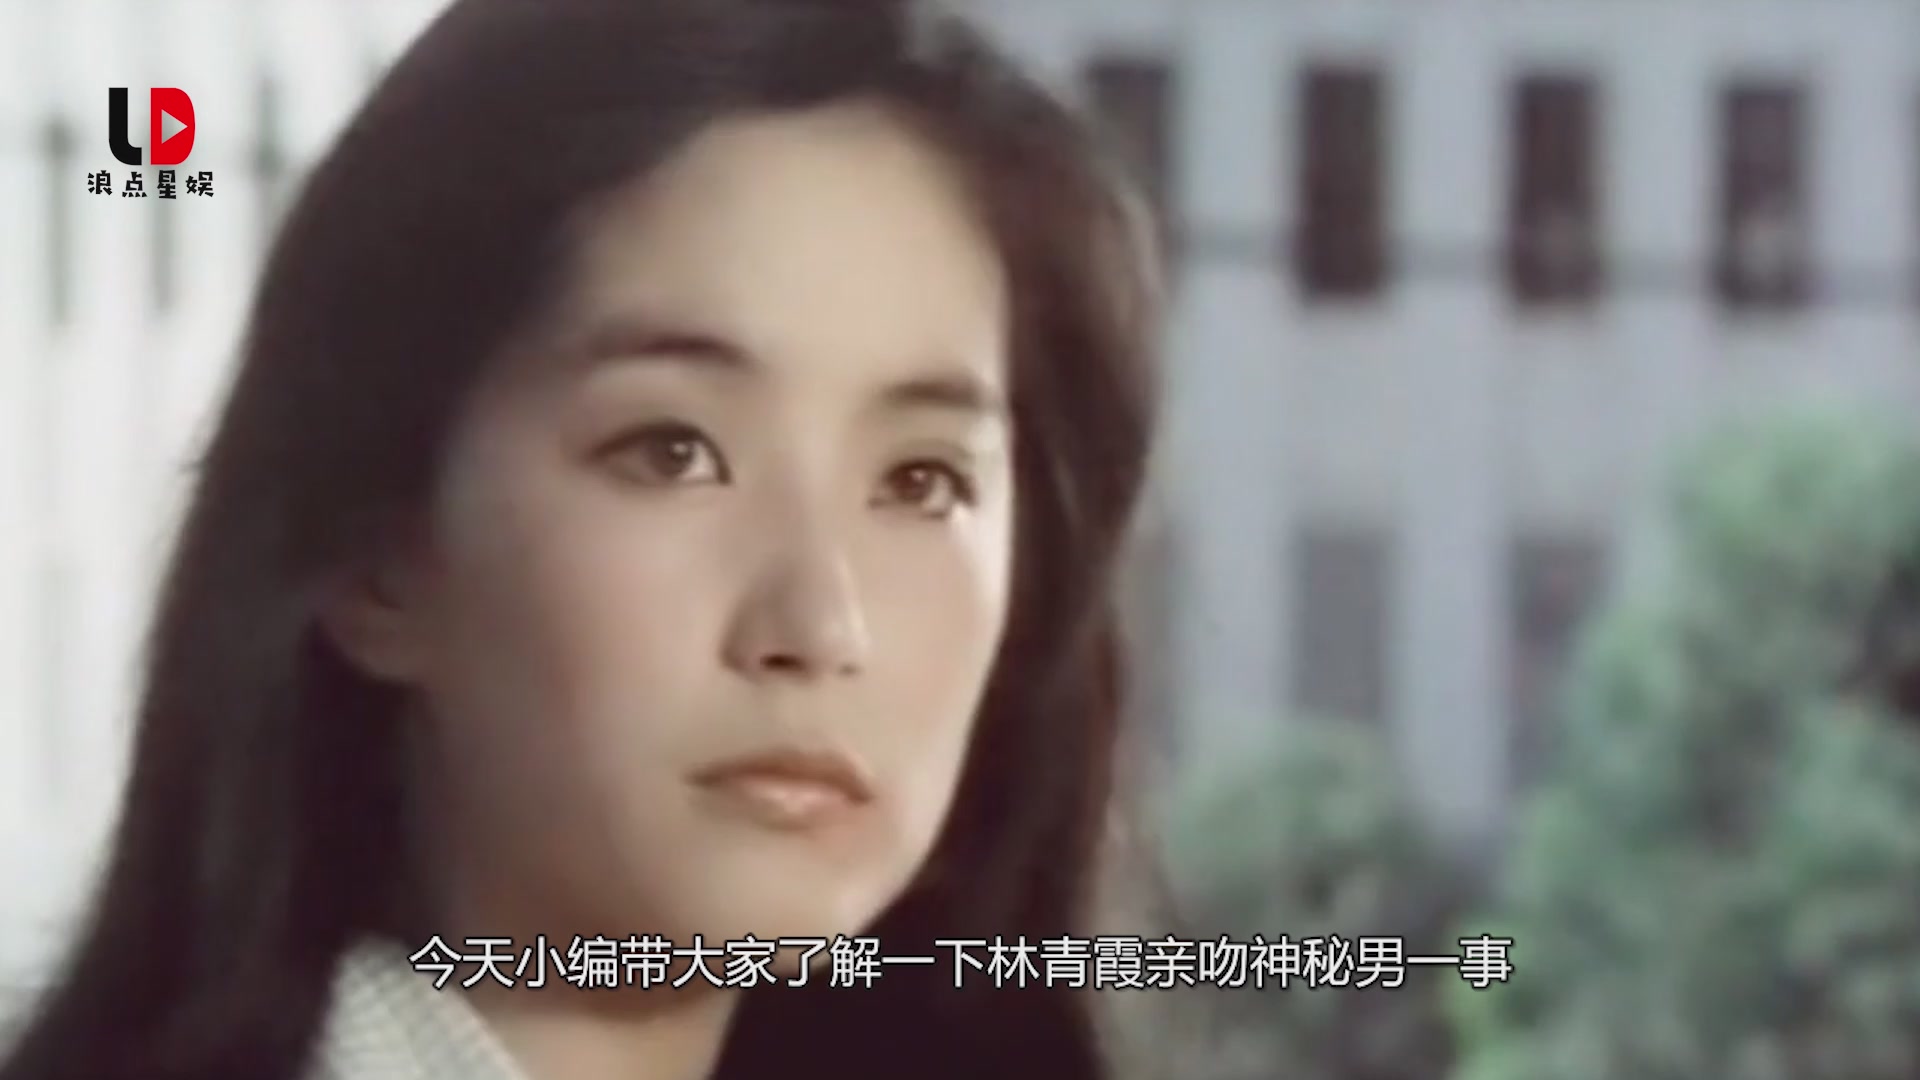 Lin Qingxia's kiss with a mysterious man was exposed to marriage, and her friends responded with insider information.